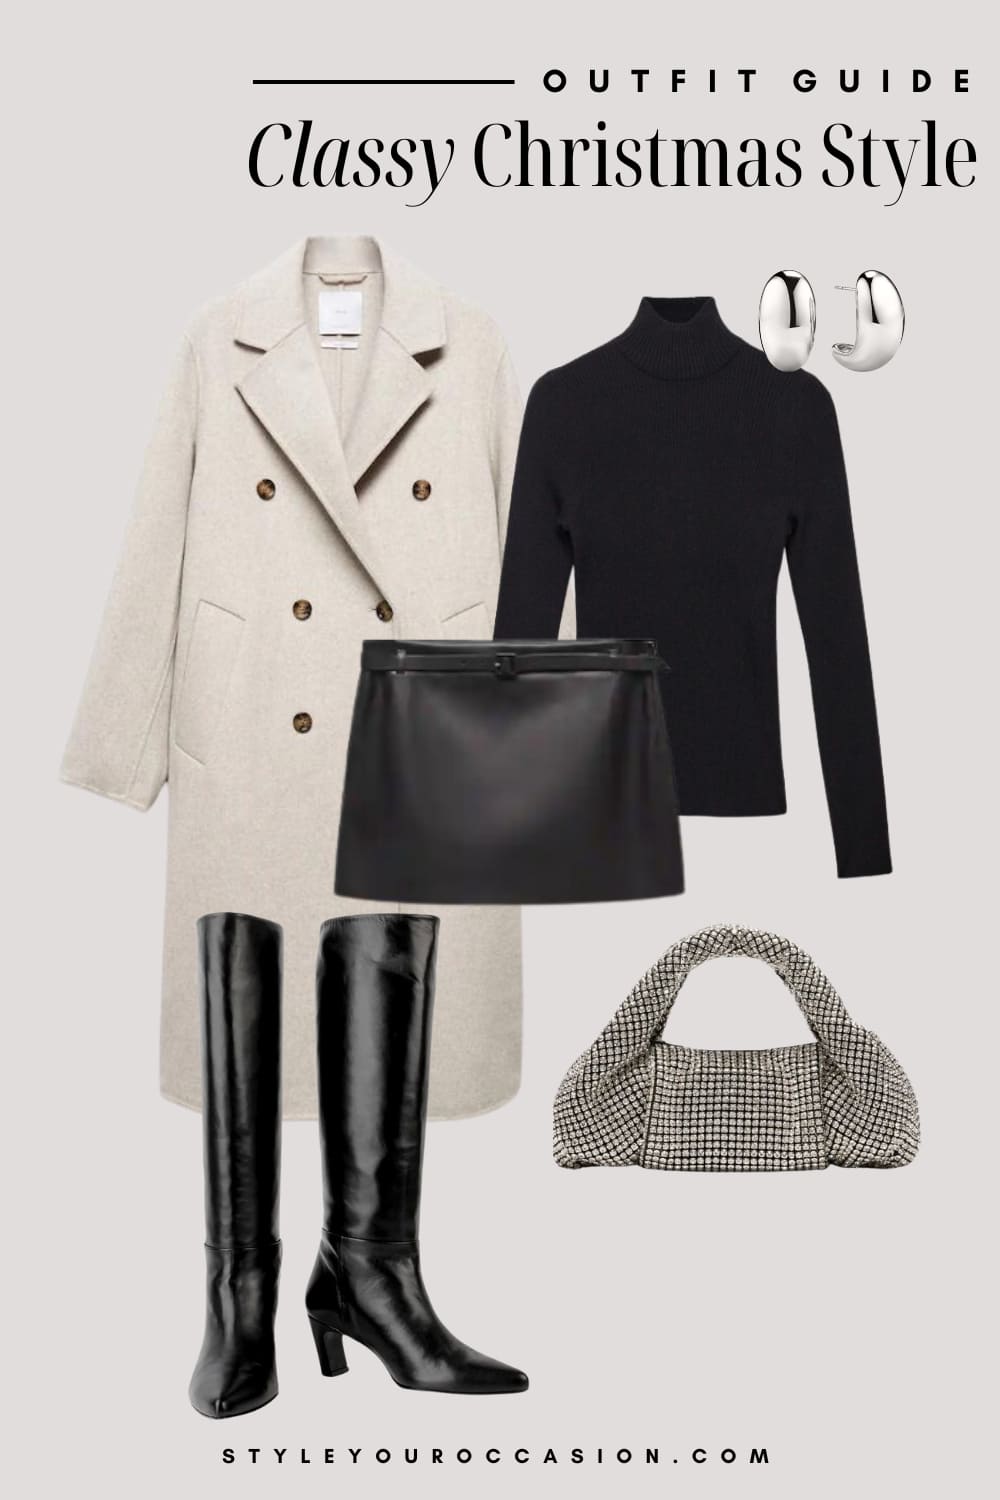 An image board of a Christmas outfit featuring a black leather mini skirt, a black turtleneck sweater, knee-high black leather boots, a long ecru coat, chunky silver hoop earrings, and a rhinestone covered handbag